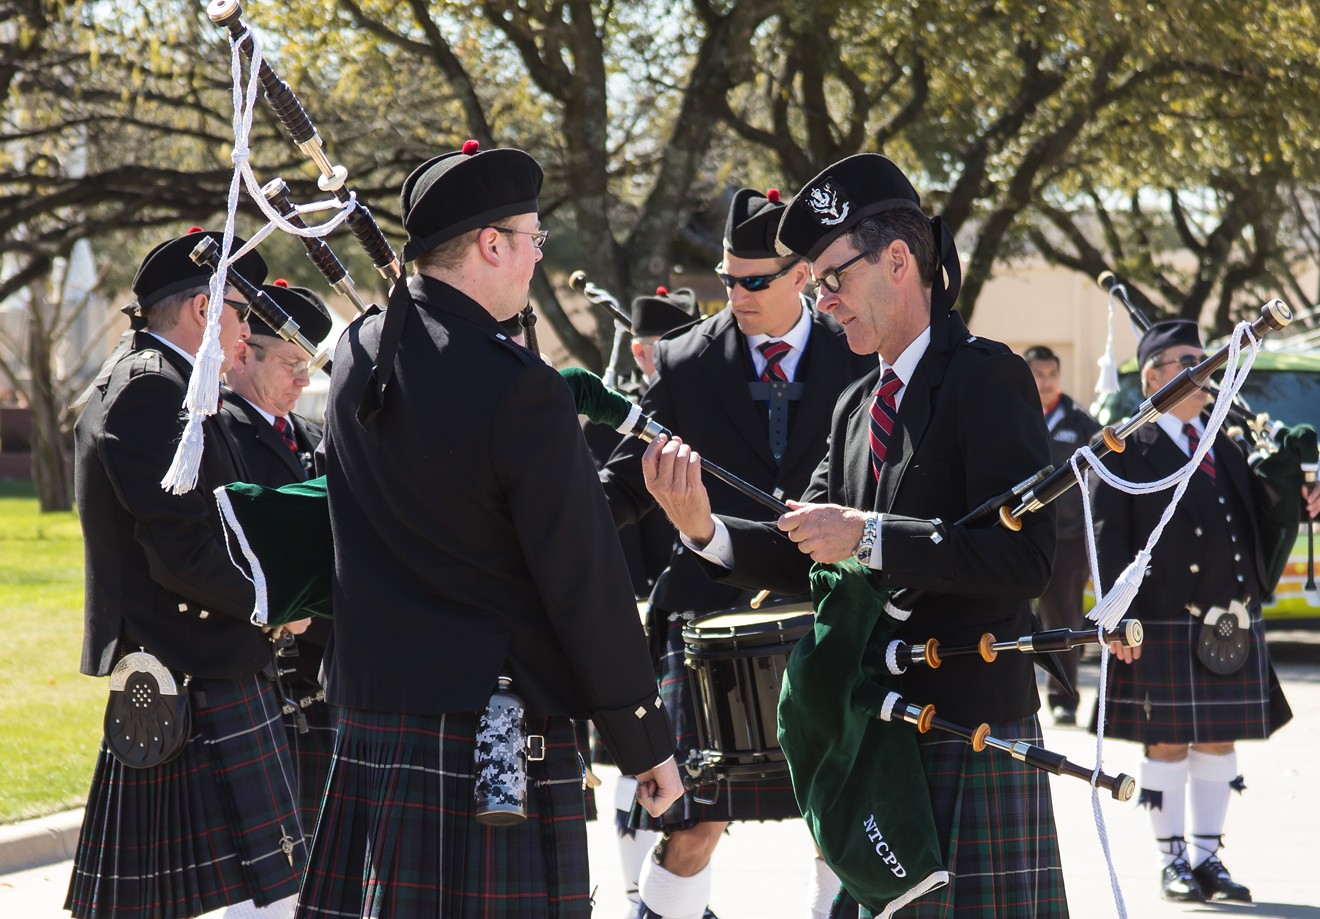 If you're into St. Patrick's Day, but not so much the Greenville Avenue parade, try going a more authentic route at the North Texas Irish Festival at Fair Park this weekend.